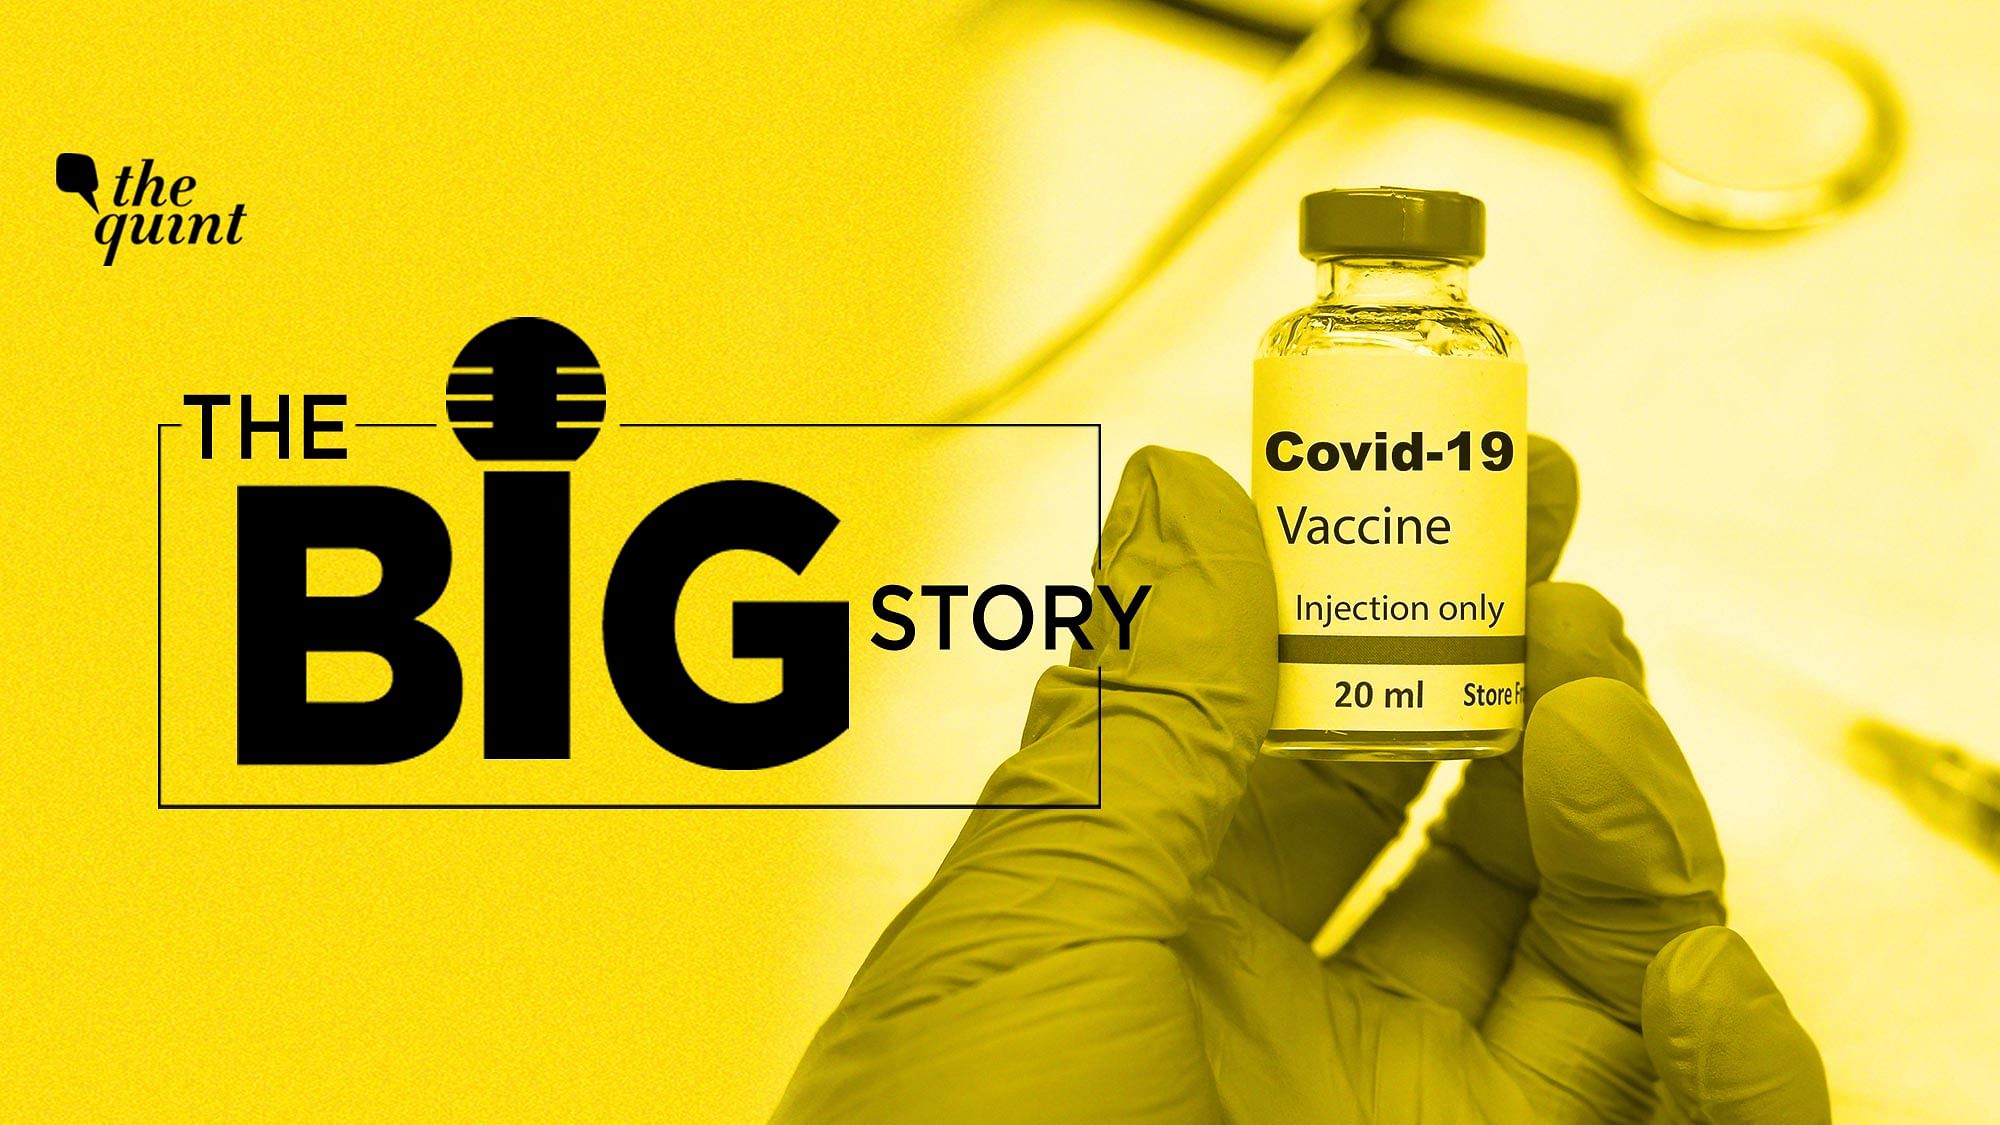 Pfizer revealed that its COVID-19 vaccine candidate was more than 90 percent efficient against infections in participants without prior infections.